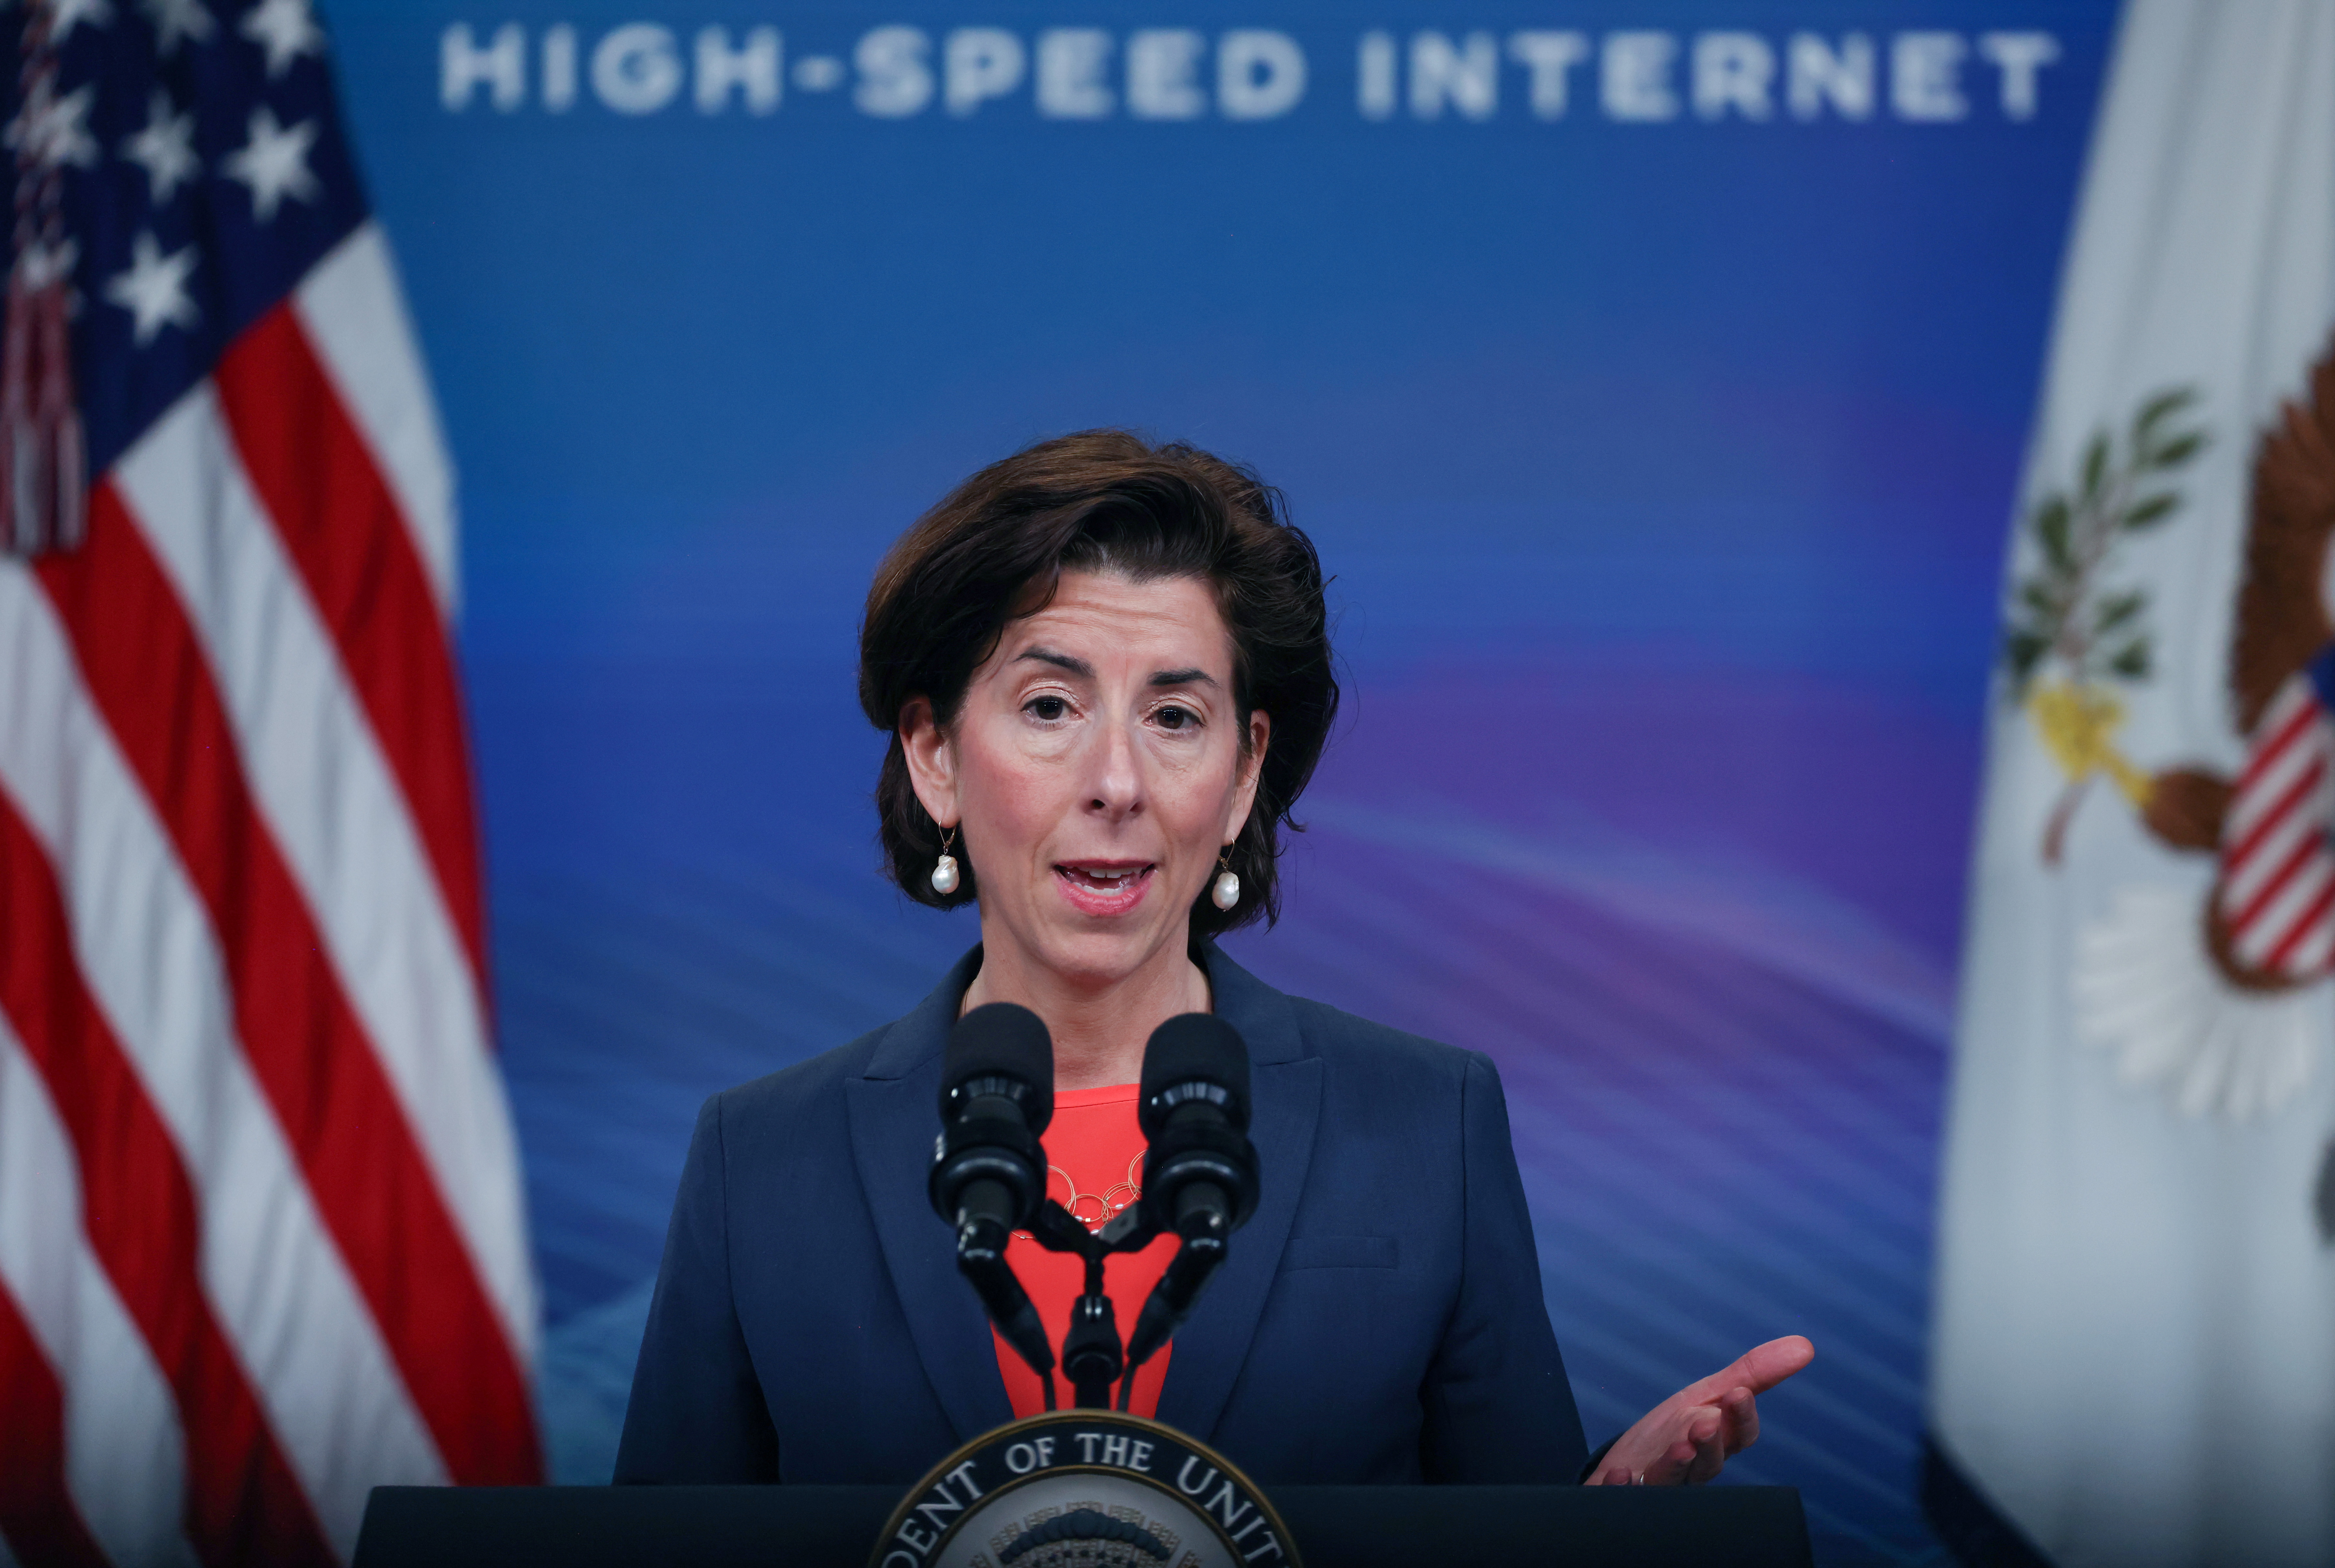 U.S. Secretary of Commerce Gina Raimondo during an infrastructure event at the White House in Washington, U.S.